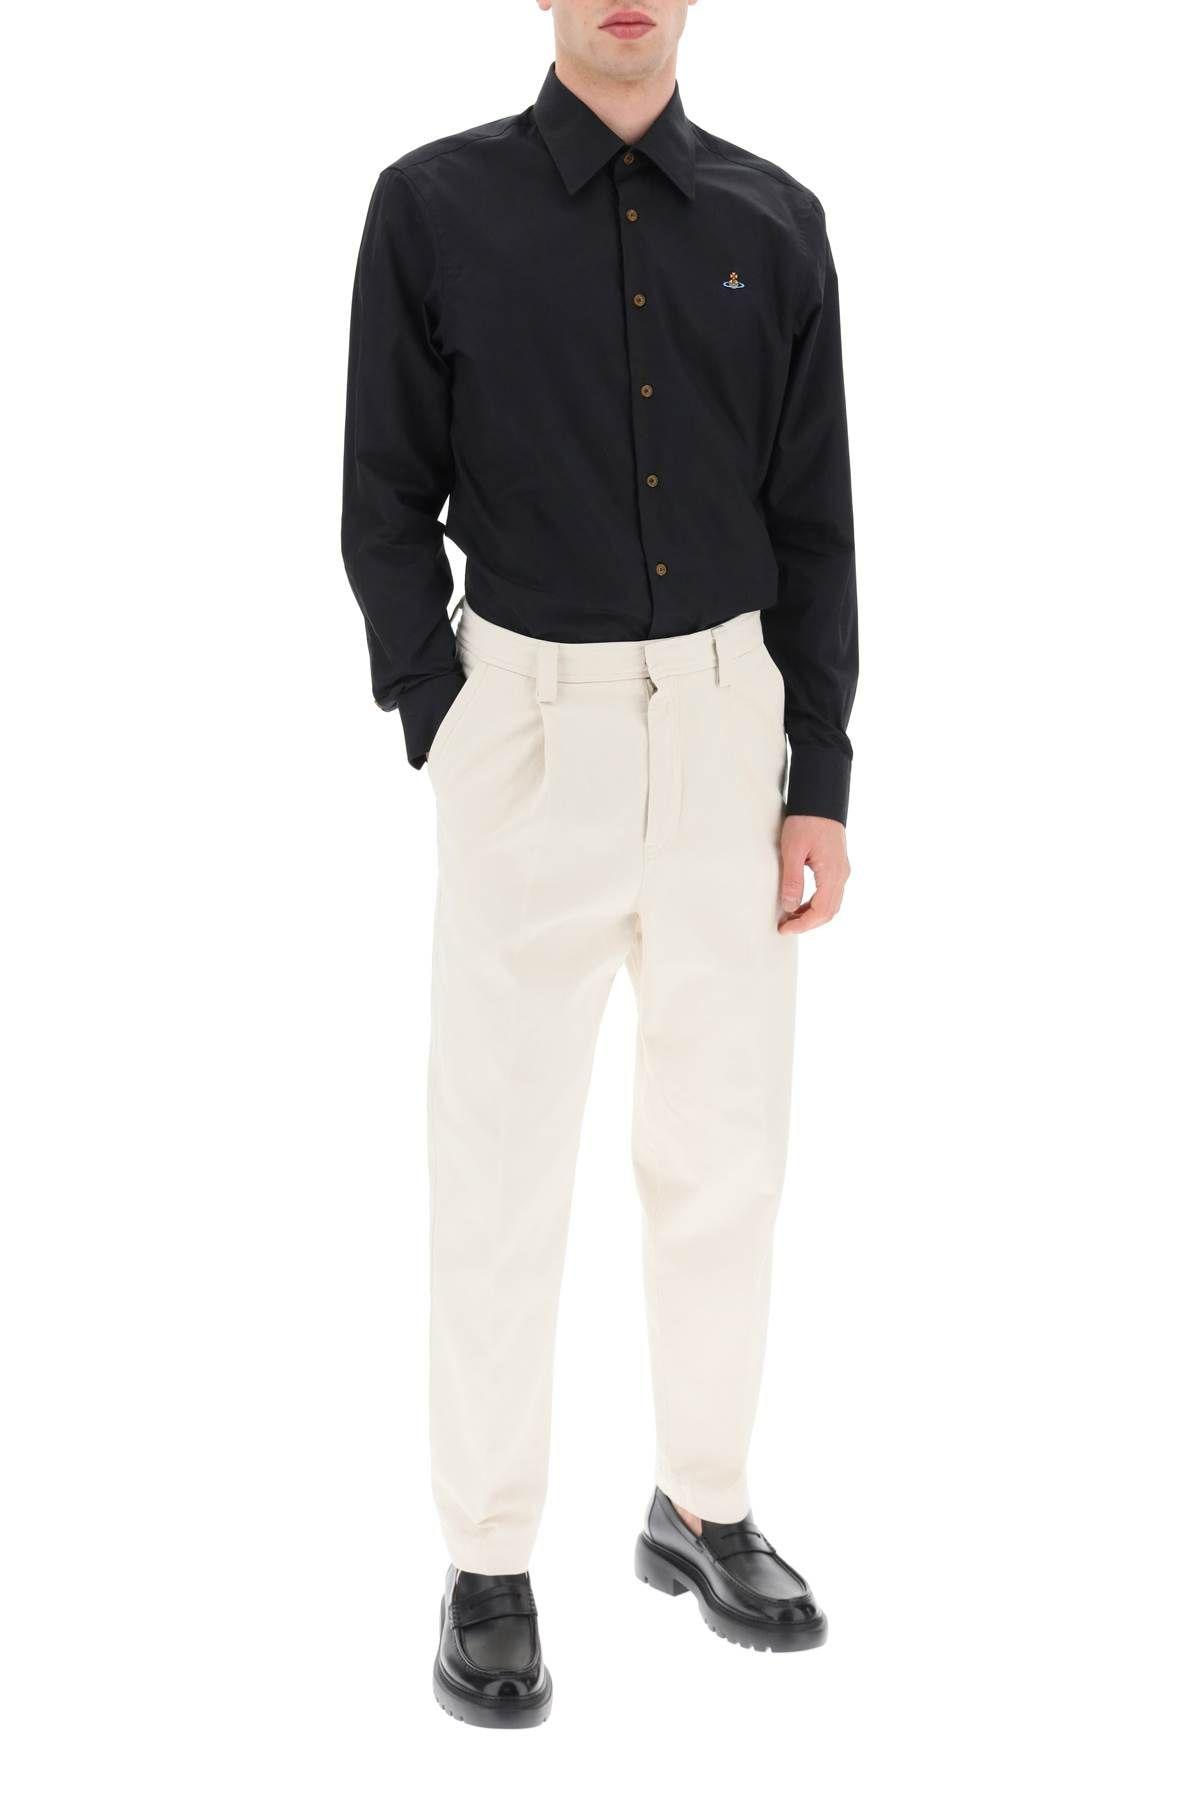 Shop Vivienne Westwood Poplin Shirt With Orb Embroidery In Black